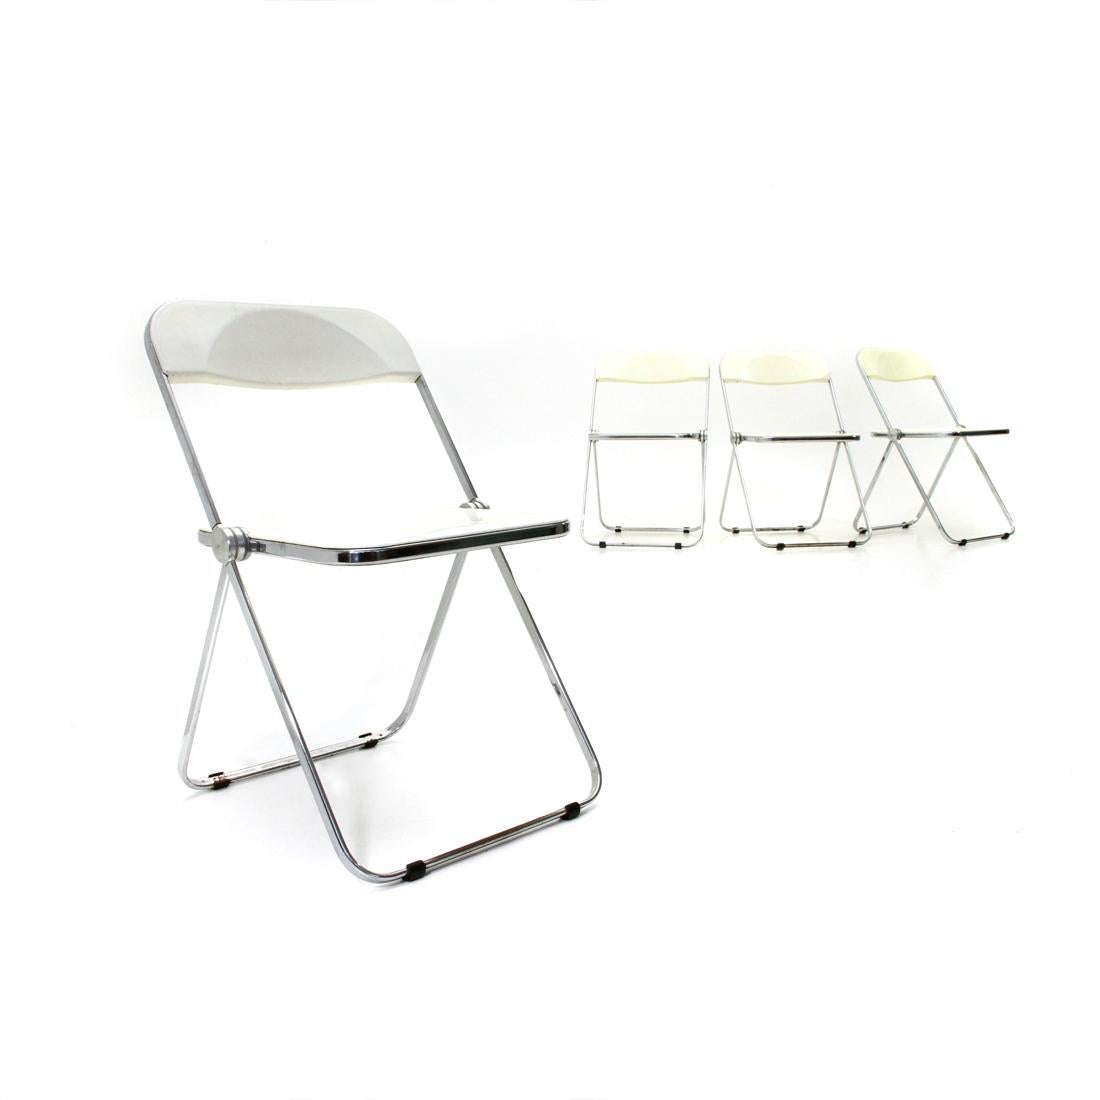 4 chairs produced by Anonima Castelli in the 1960s designed by Giancarlo Piretti.
Chromed metal structure.
Seat and back in plastic.
Good general condition, some signs and traces of rust due to normal use over time.

Dimensions: Length 47 cm -